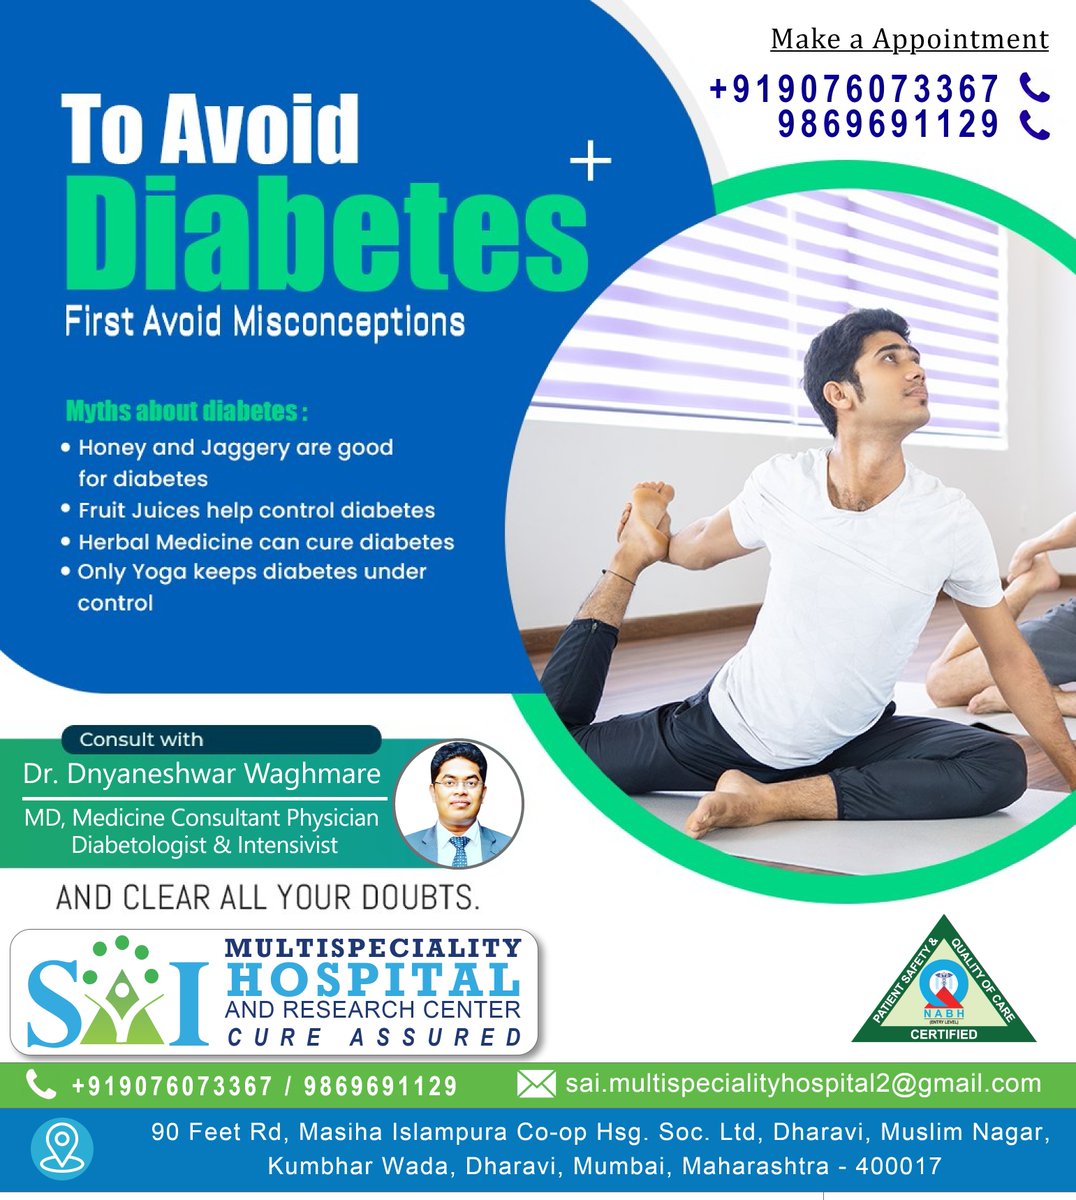 To Avoid Diabetes +
First Avoid Misconceptions
Consult with
Dr. Dnyaneshwar Waghmare
MD, Medicine Consultant Physician
Diabetologist & Intensivist

Contact to Sai Multispeciality Hospital ResearchCentre 
+919076073367 / 9869691129

#hospital #mumbai #Doctors #surgeon #diebetes